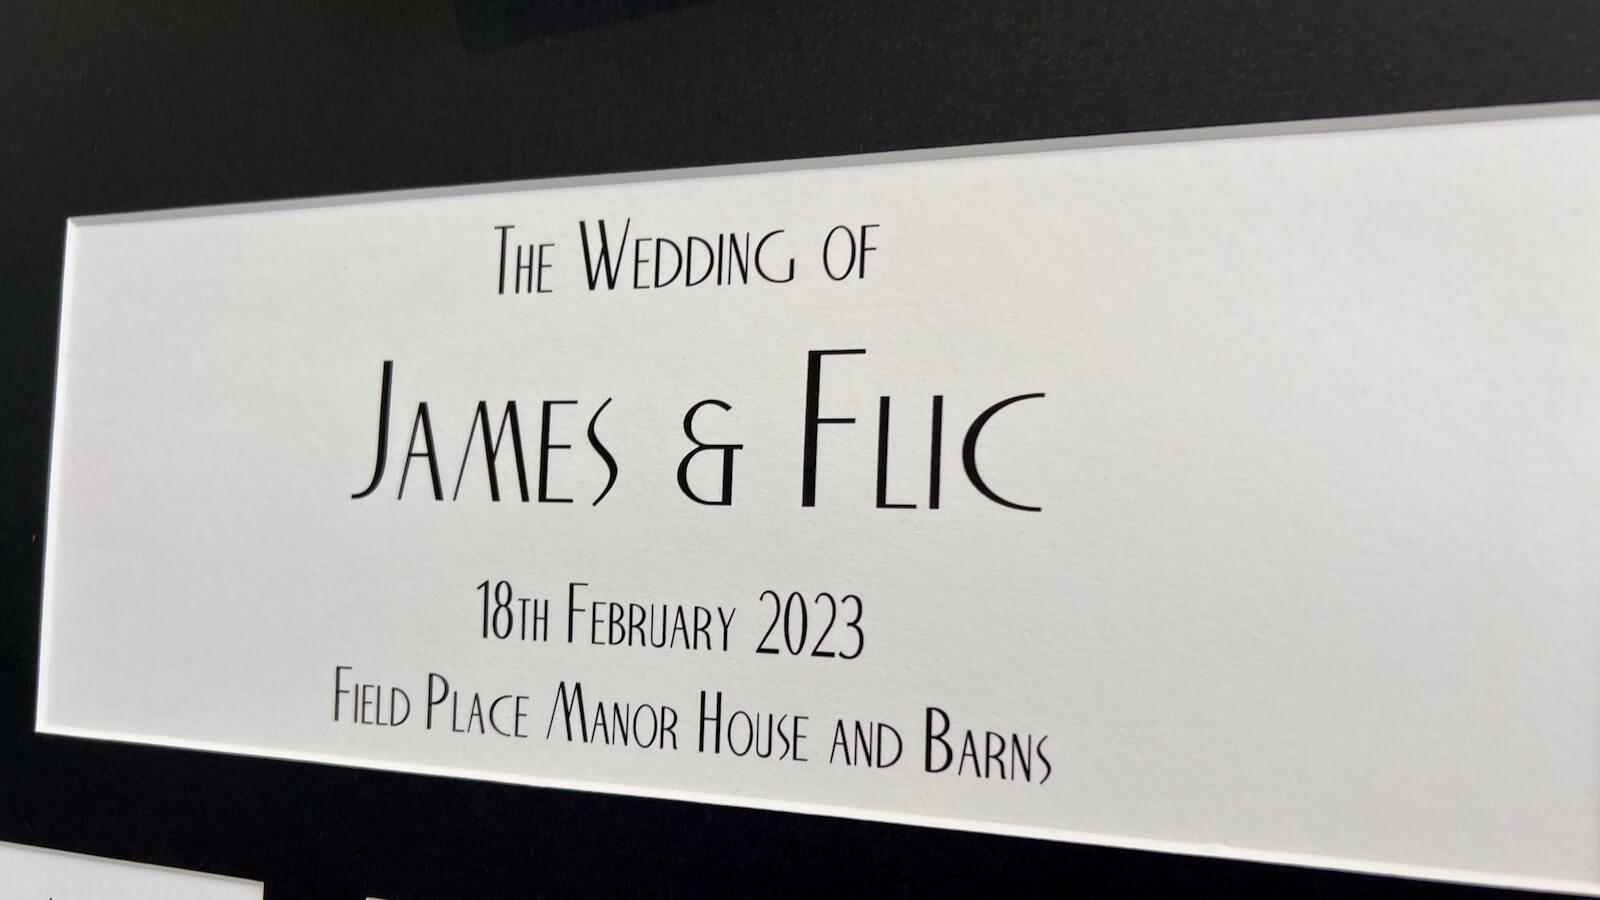 Felicity and James's wedding - 18th February 2023